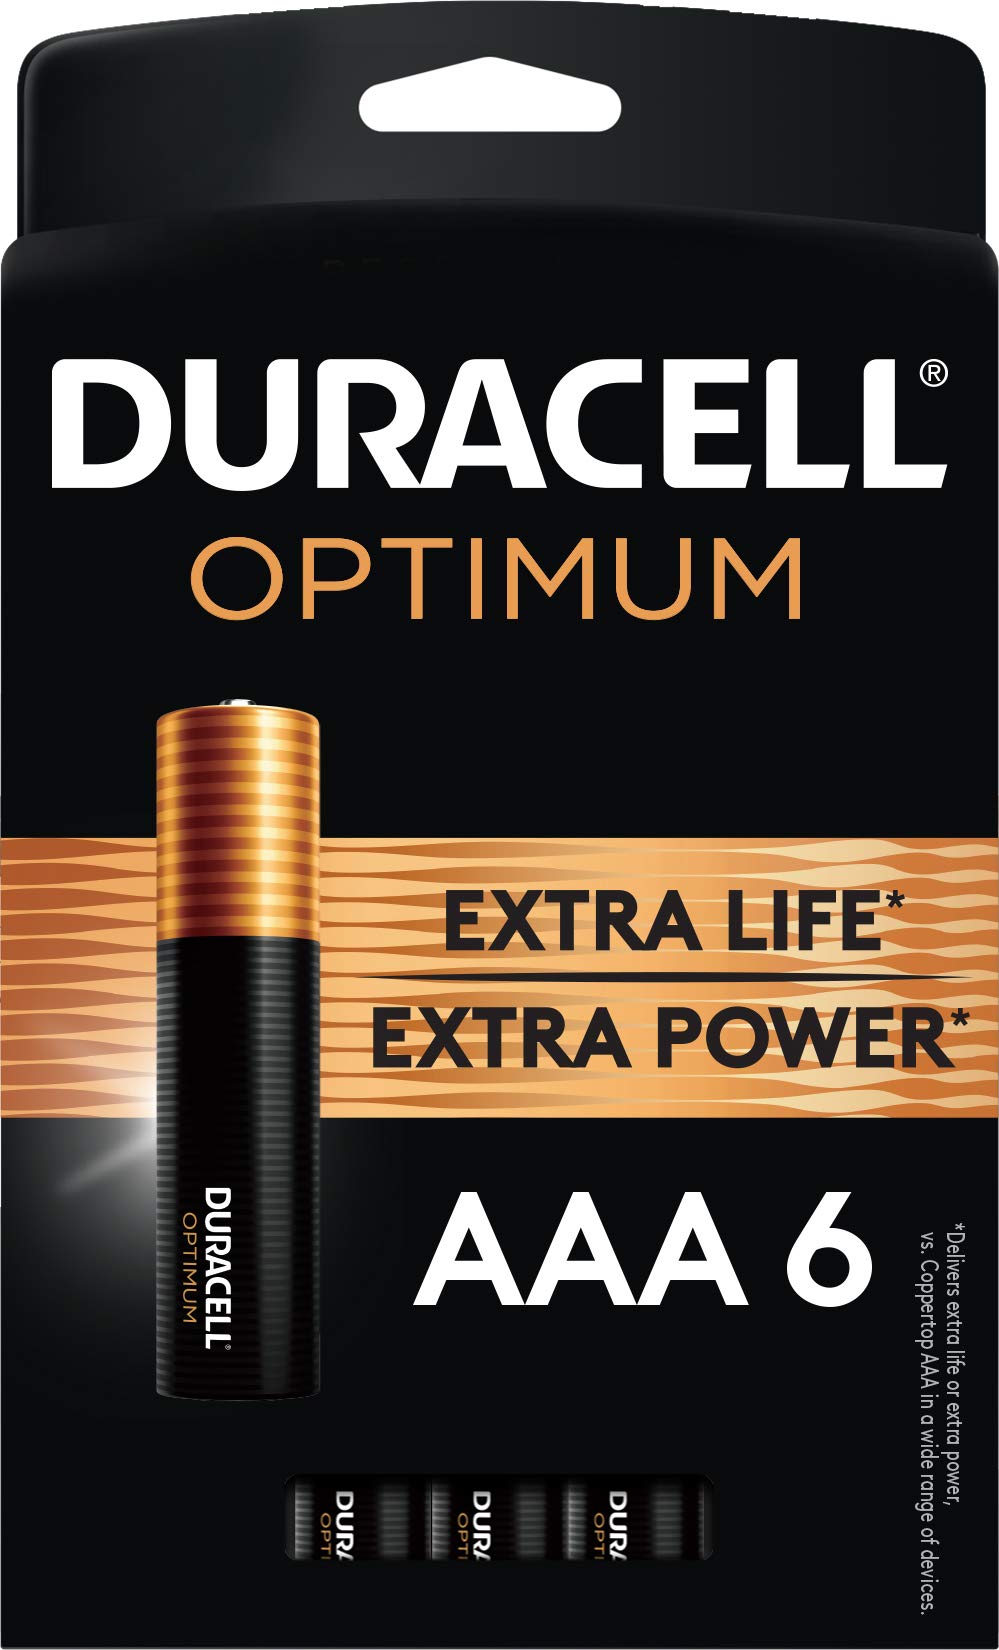 Duracell Optimum AAA Batteries For Household And Office Devices